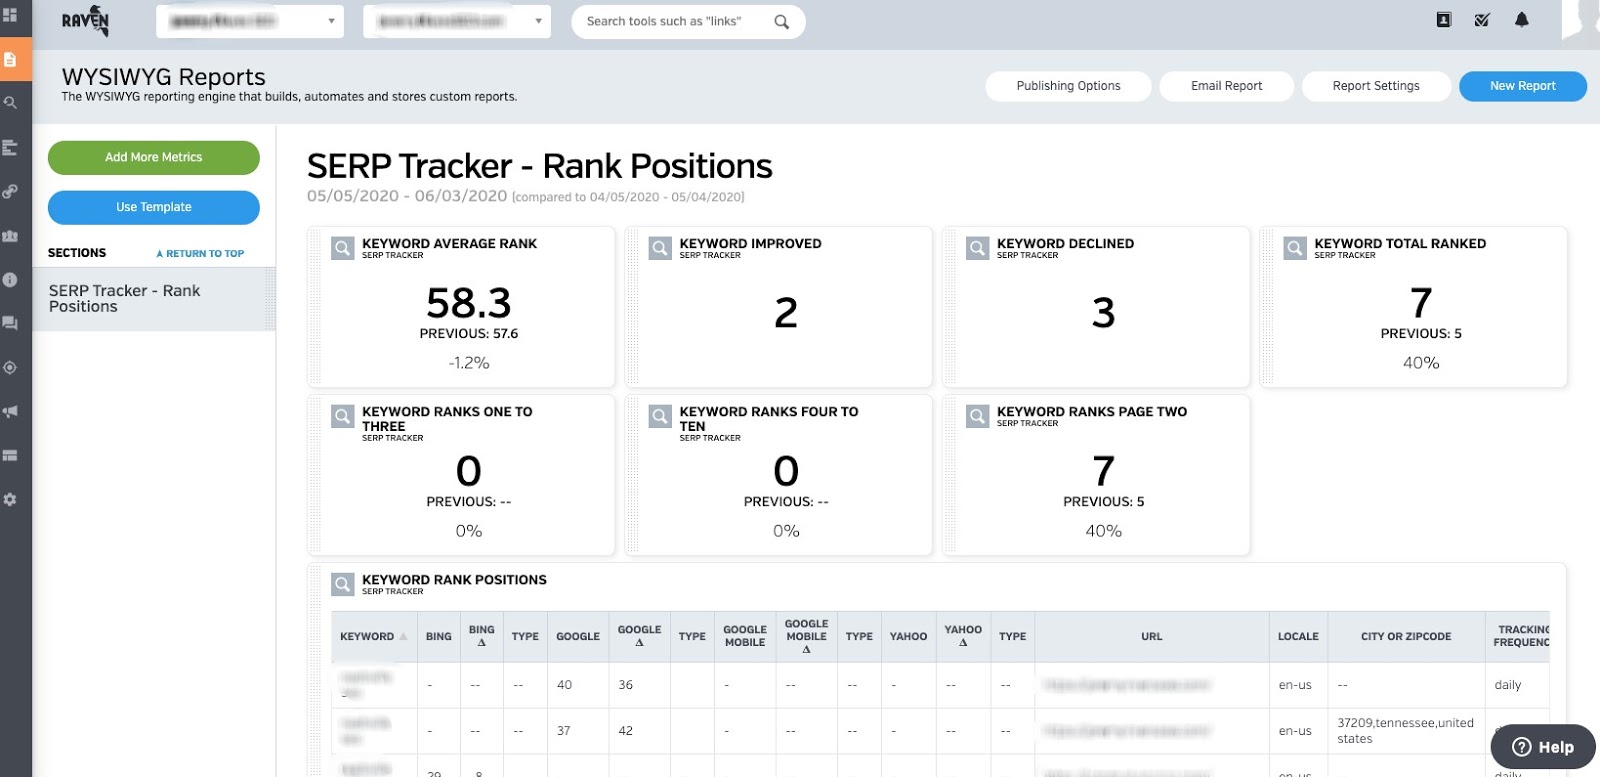 SERP Tracker - Rank Positions in Raven Tools